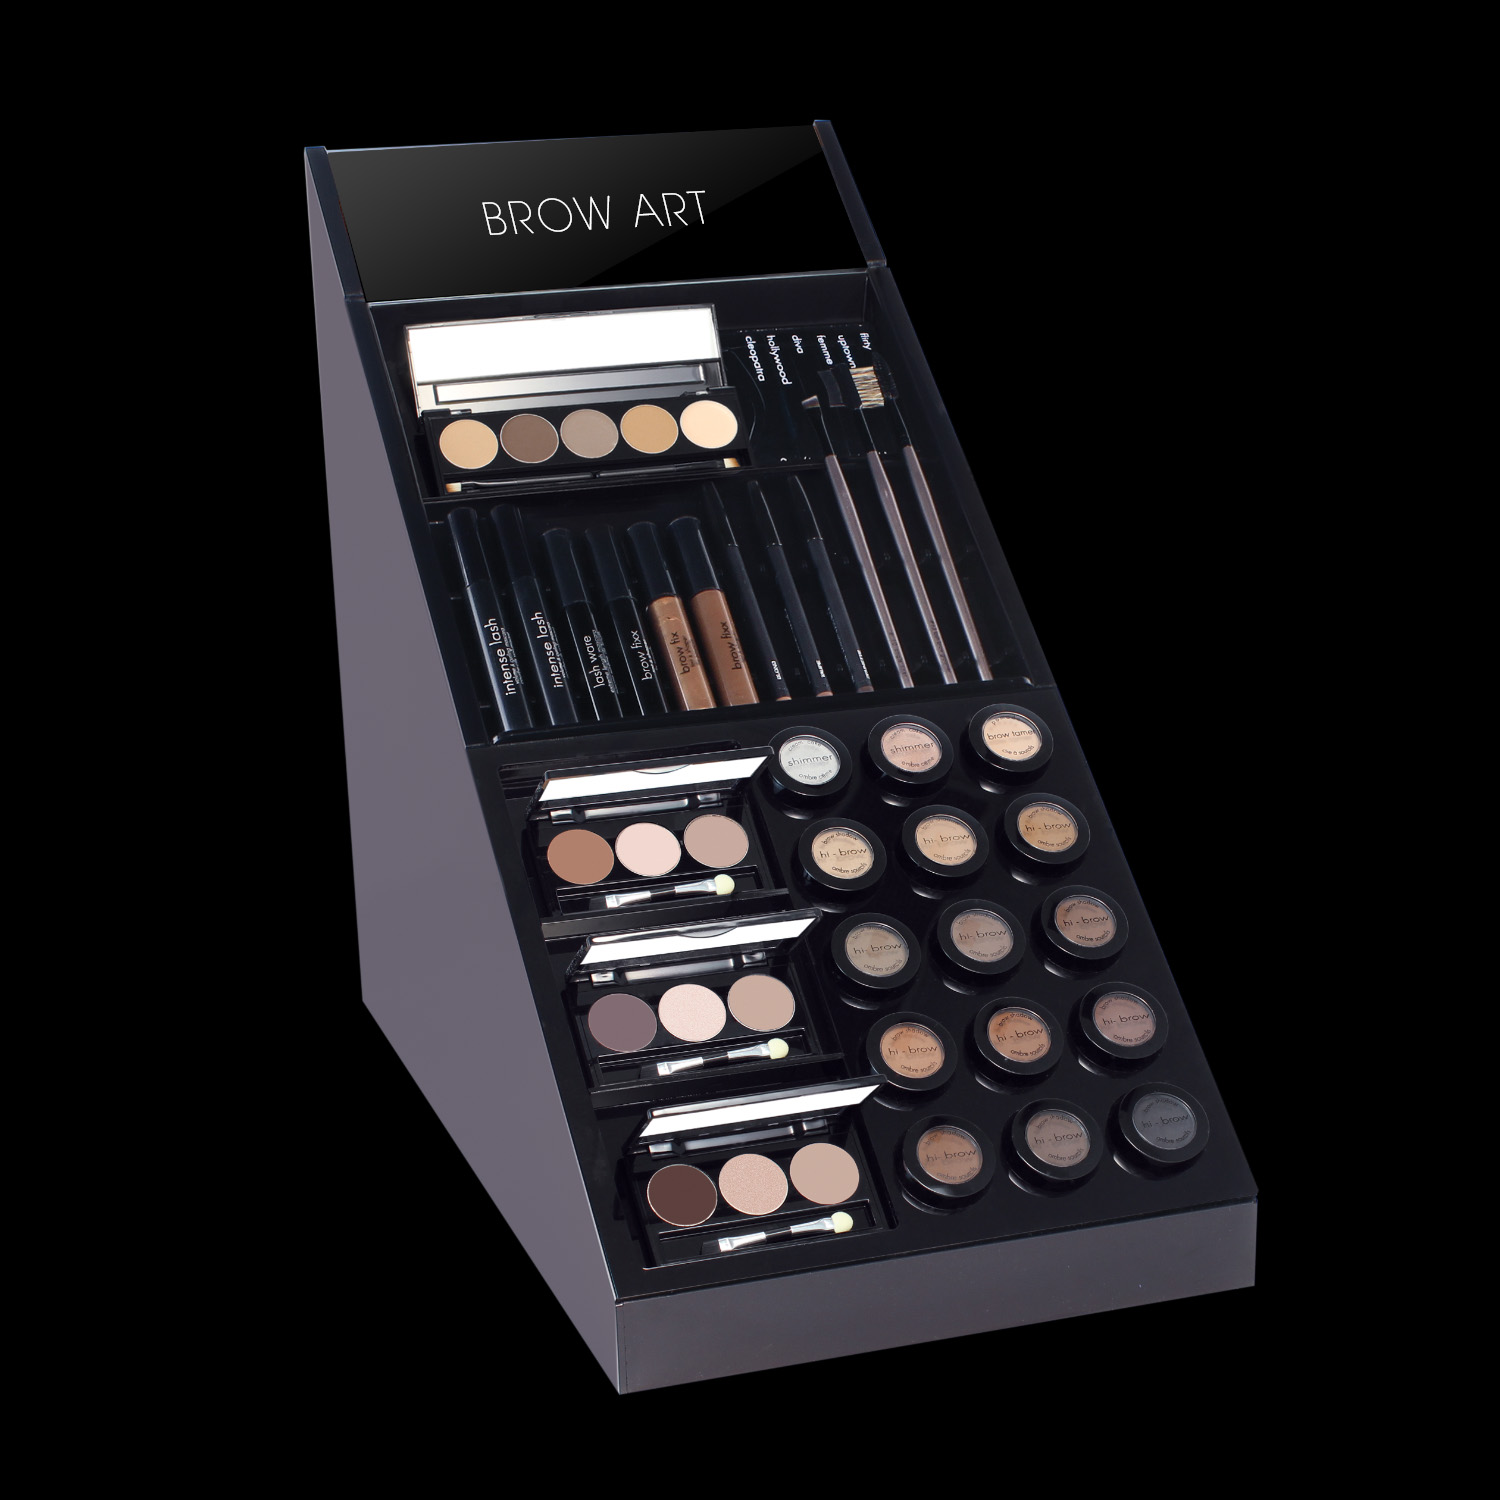 Classic packaging Visionary brow displays to create an exquisite retail environment with ease